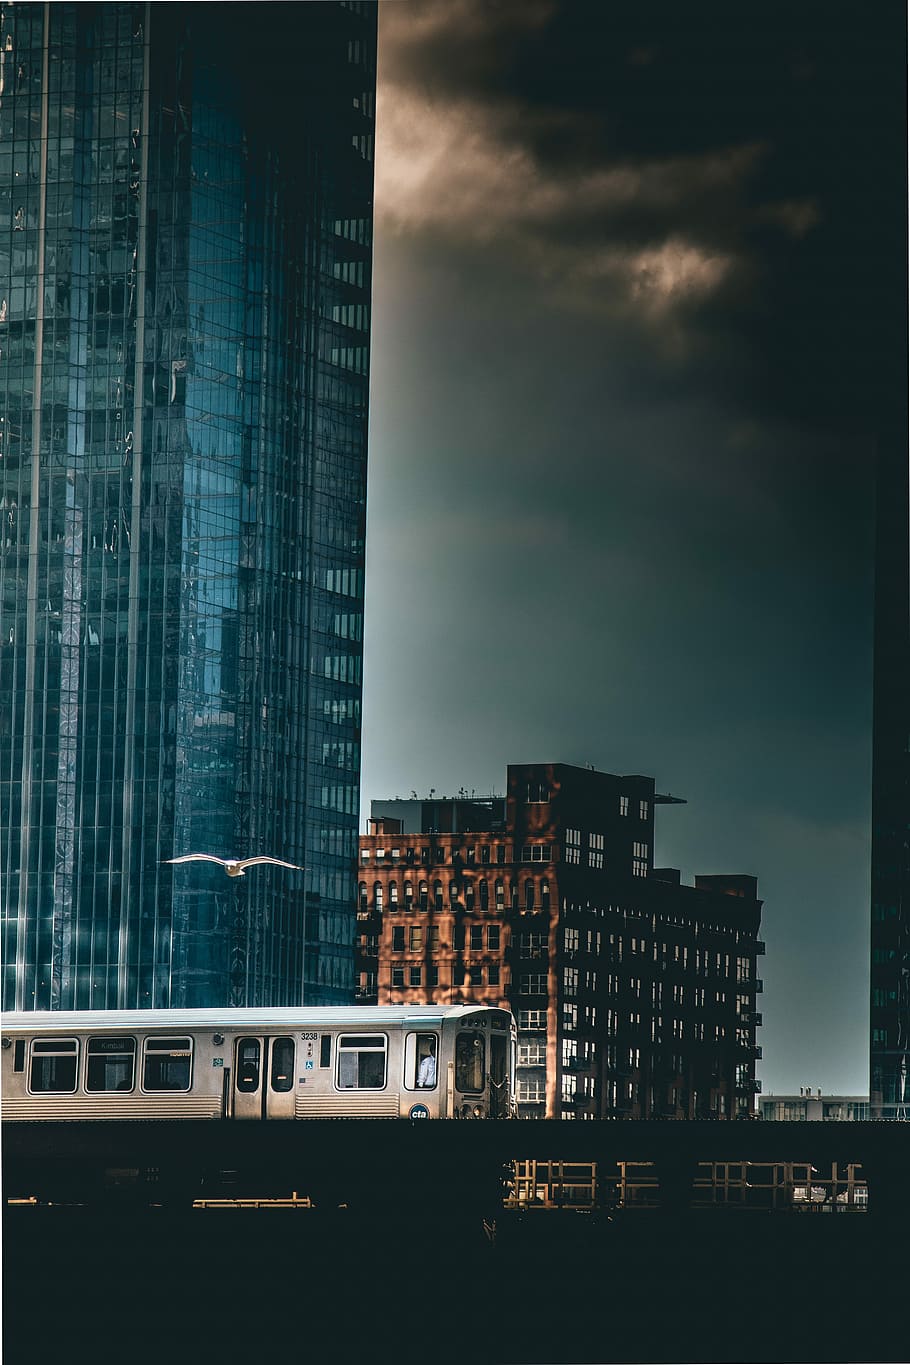 gray train passing by high-rise building, white bird flying above the train along the street near building during daytime, HD wallpaper